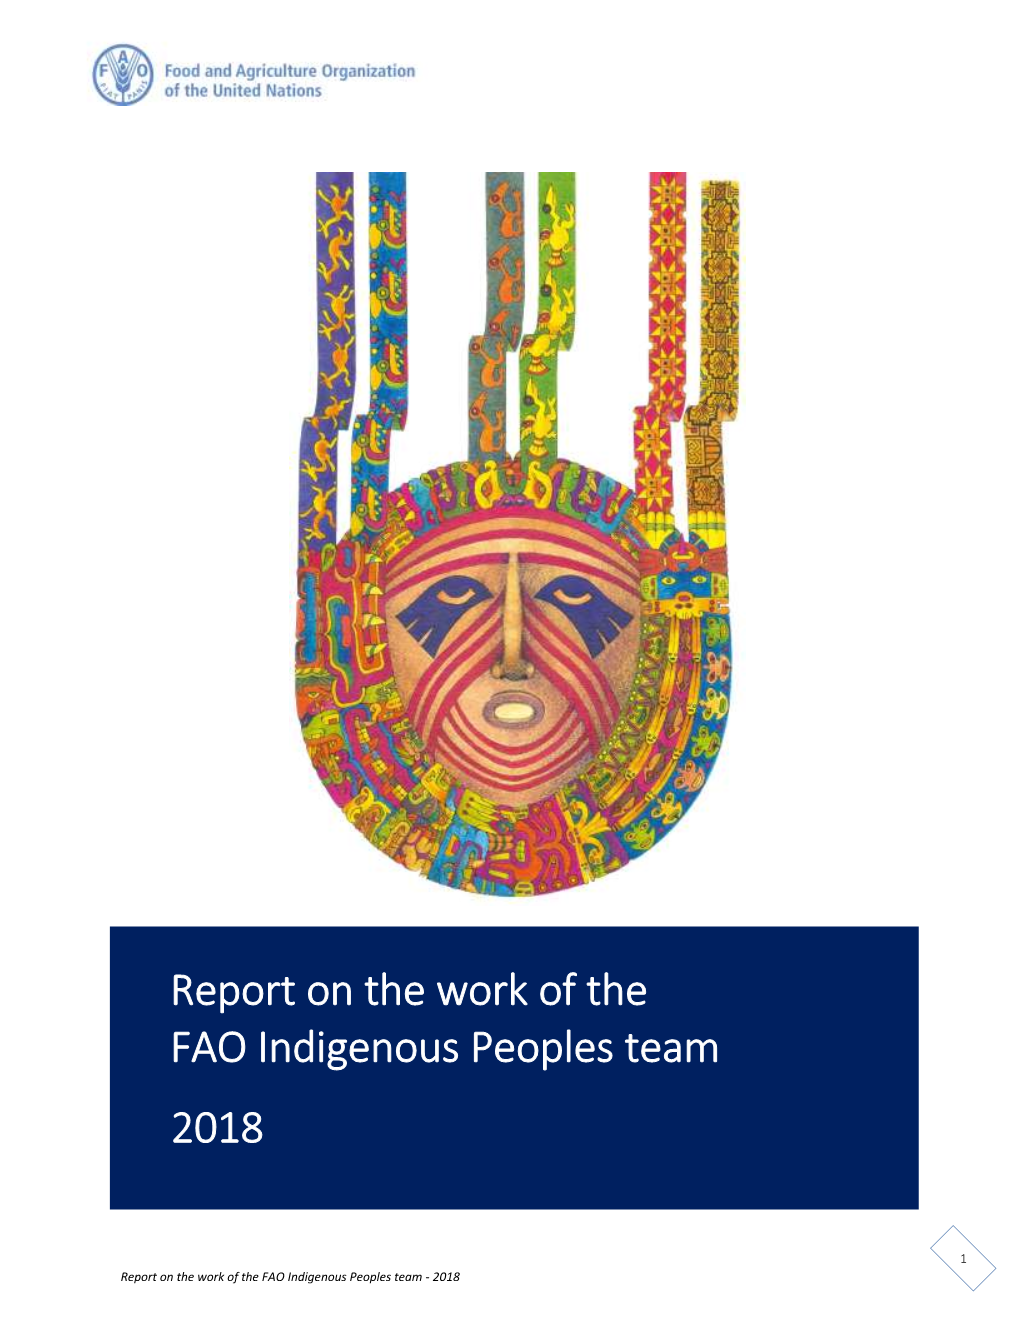 Report on the Work of the FAO Indigenous Peoples Team 2018